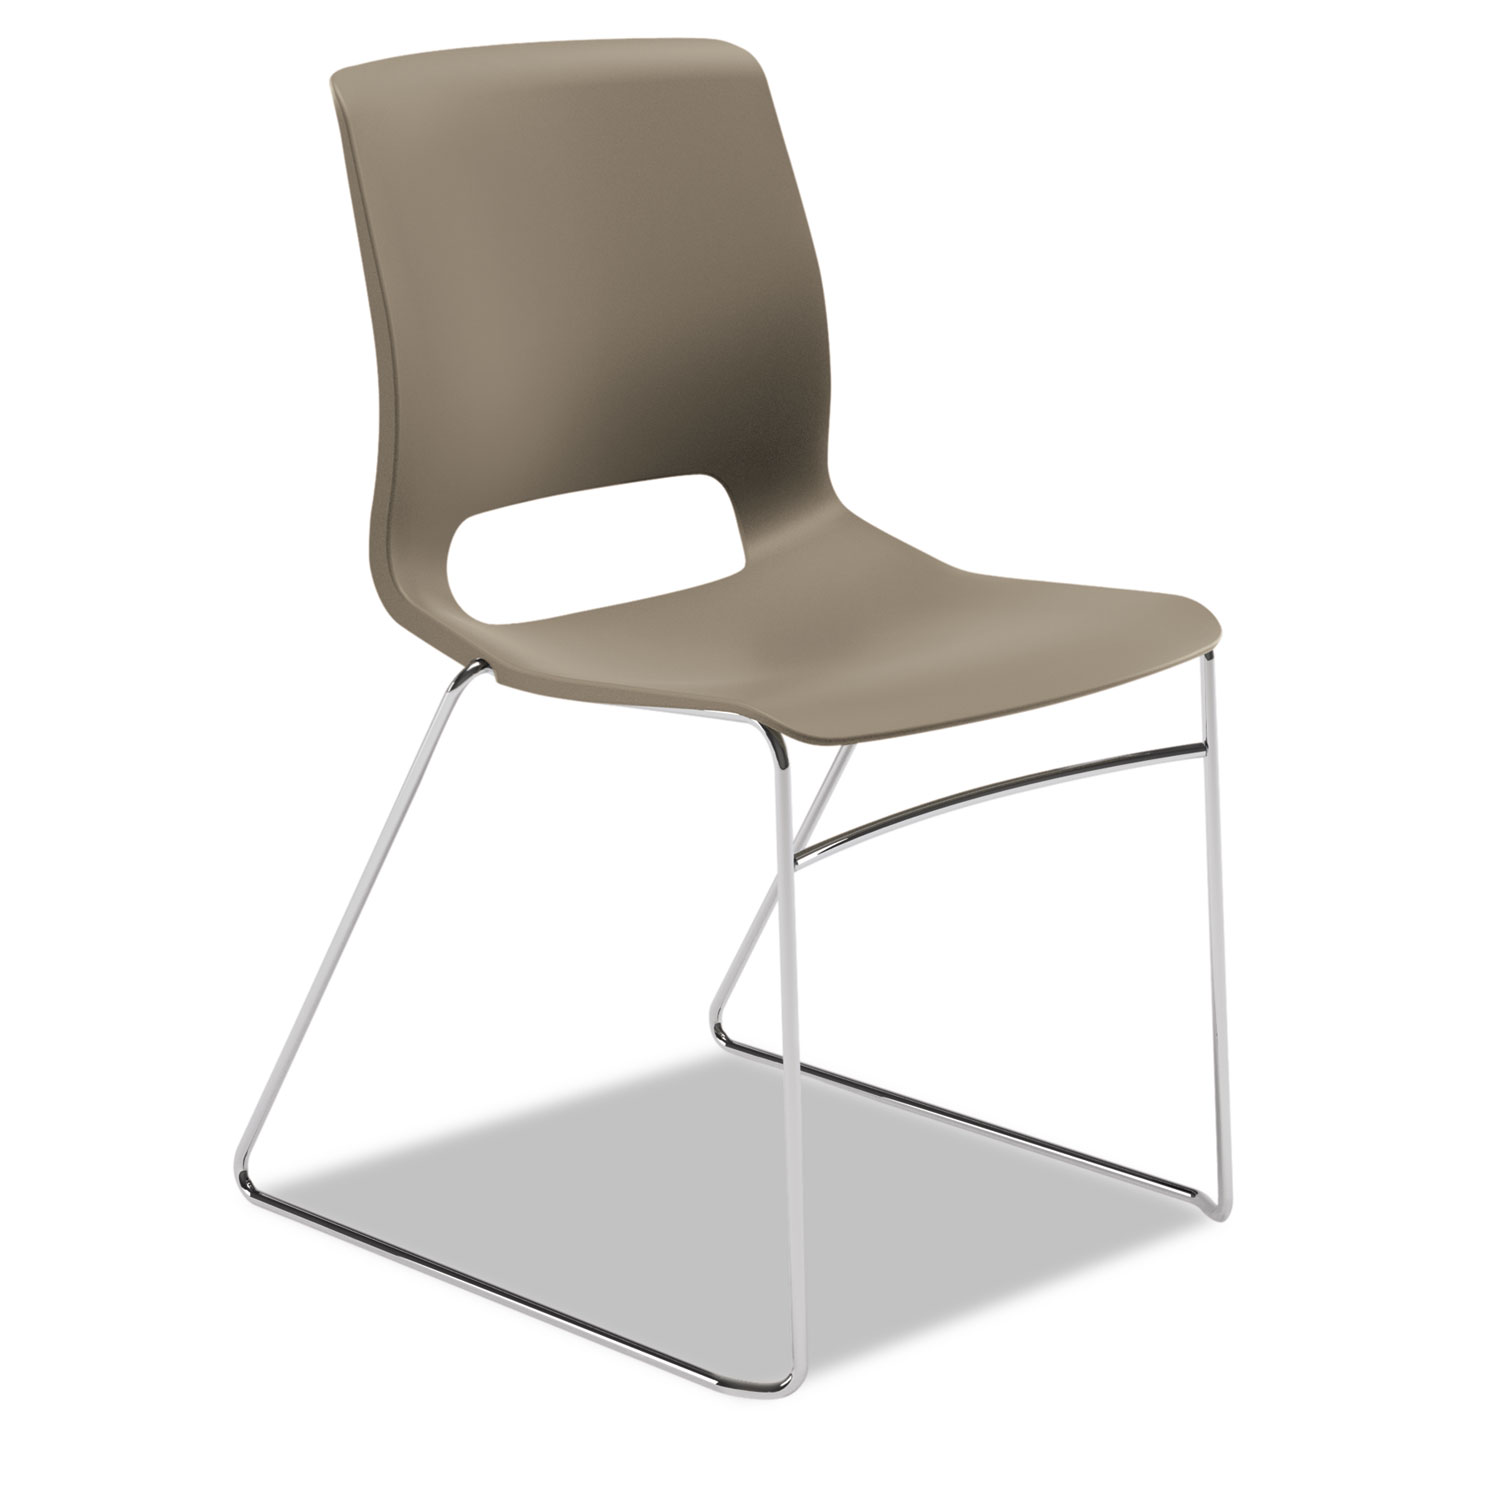 Motivate Seating High-Density Stacking Chair, Shadow/Chrome, 4/Case